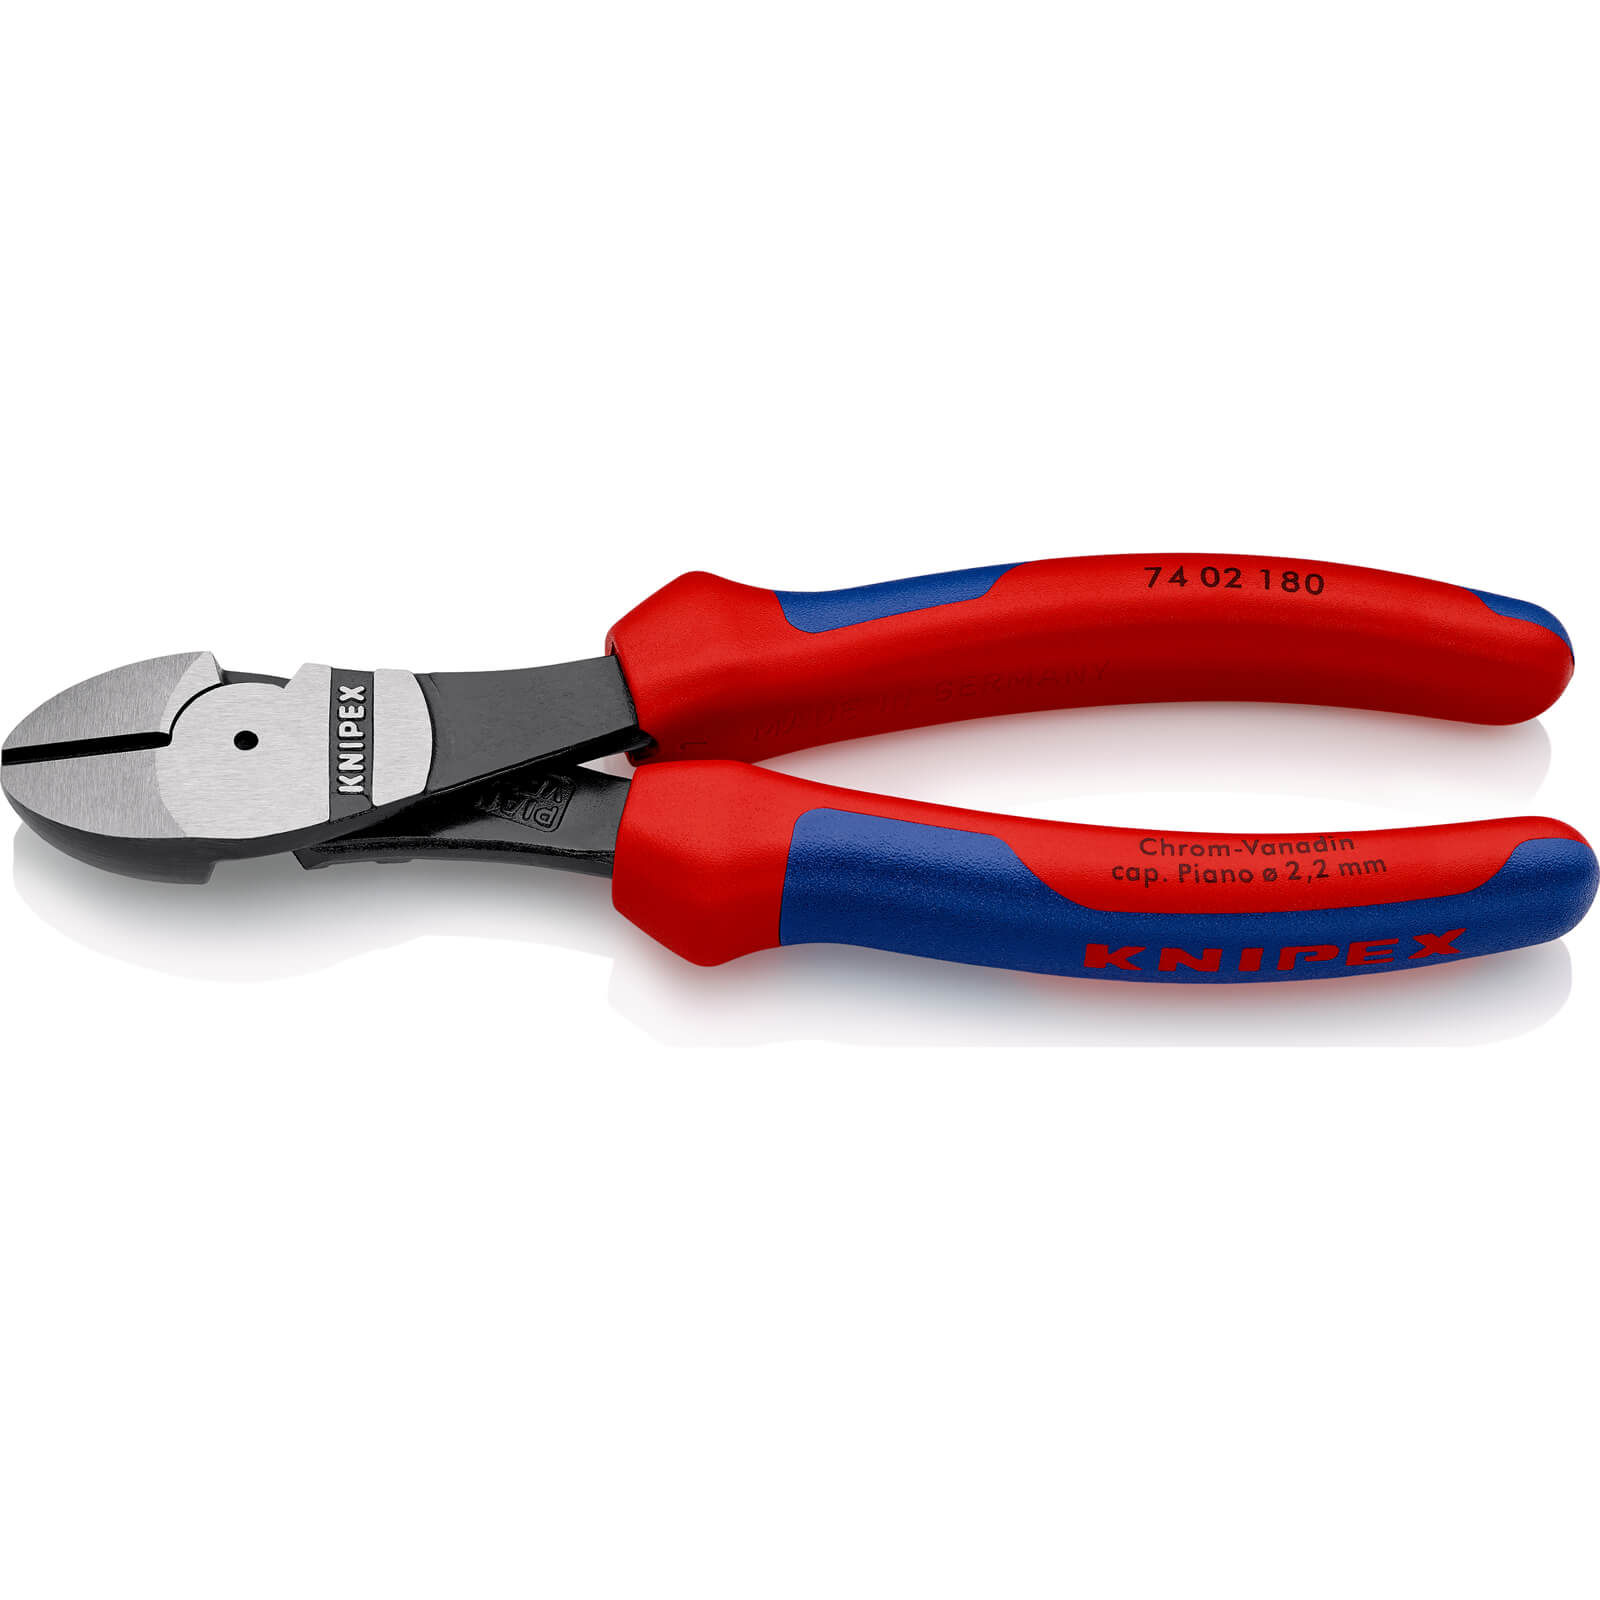 Image of Knipex 74 02 Diagonal Cutting Pliers 180mm